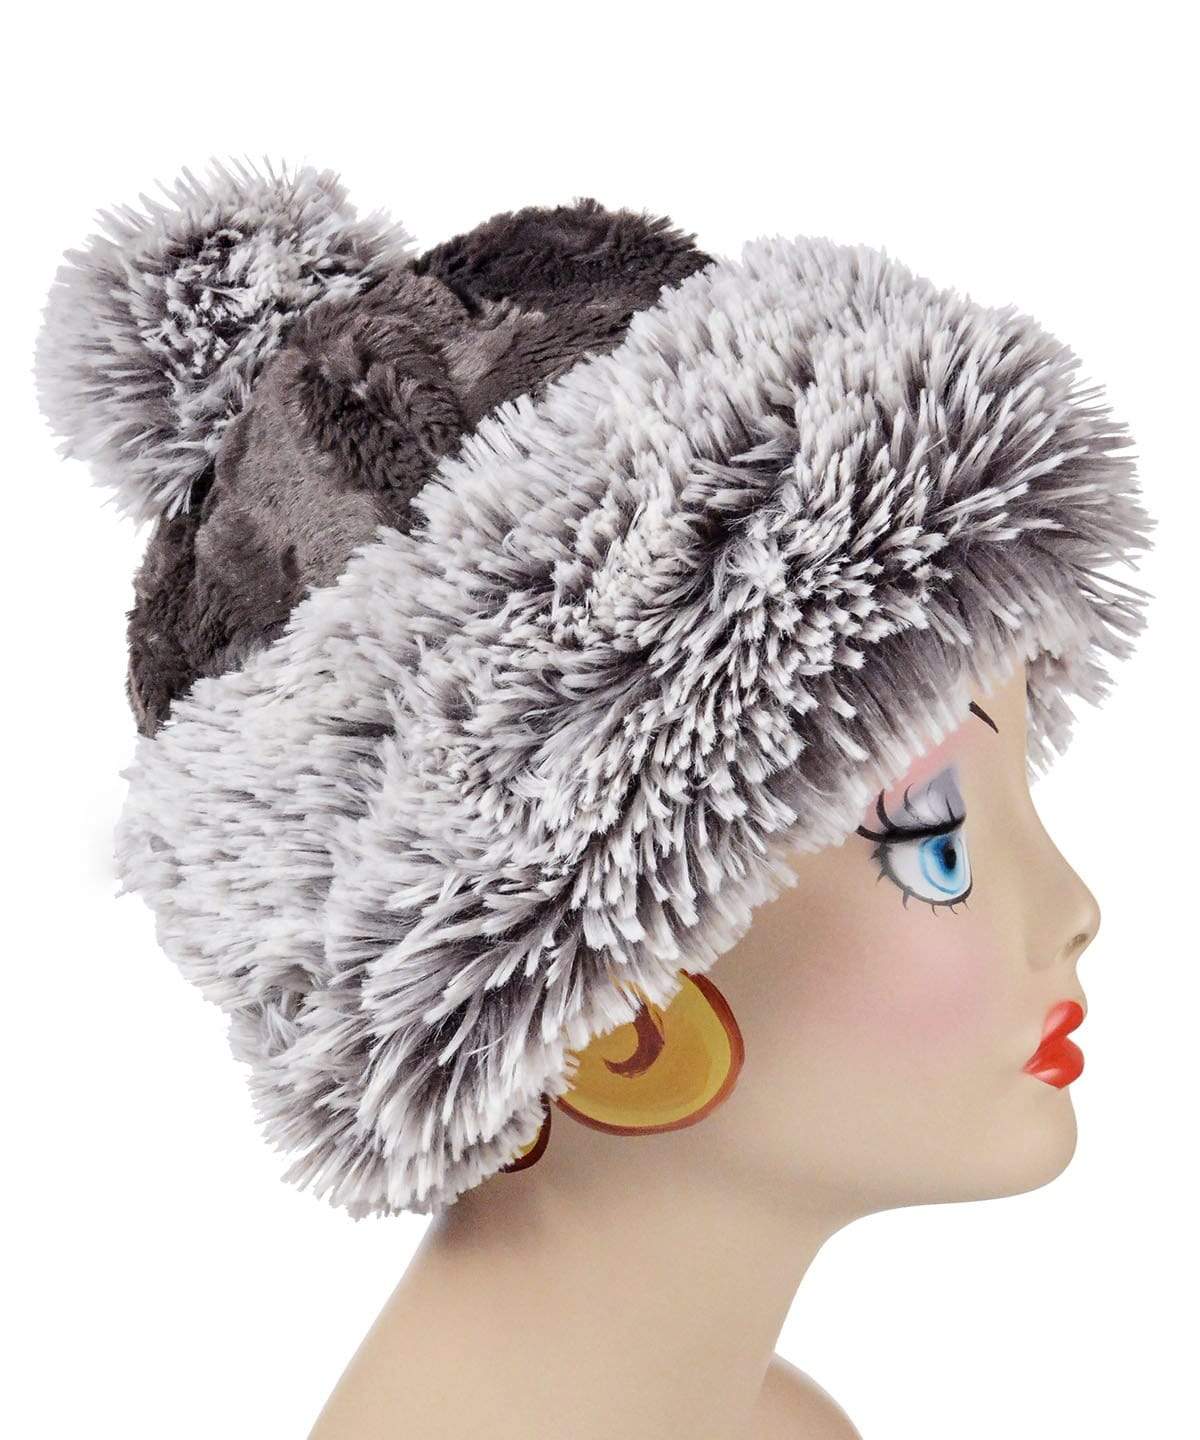 Beanie Hat  reversible in Pearl Fox and Cuddly Gray Faux Fur. Handmade by Pandemonium Millinery in Seattle, WA.